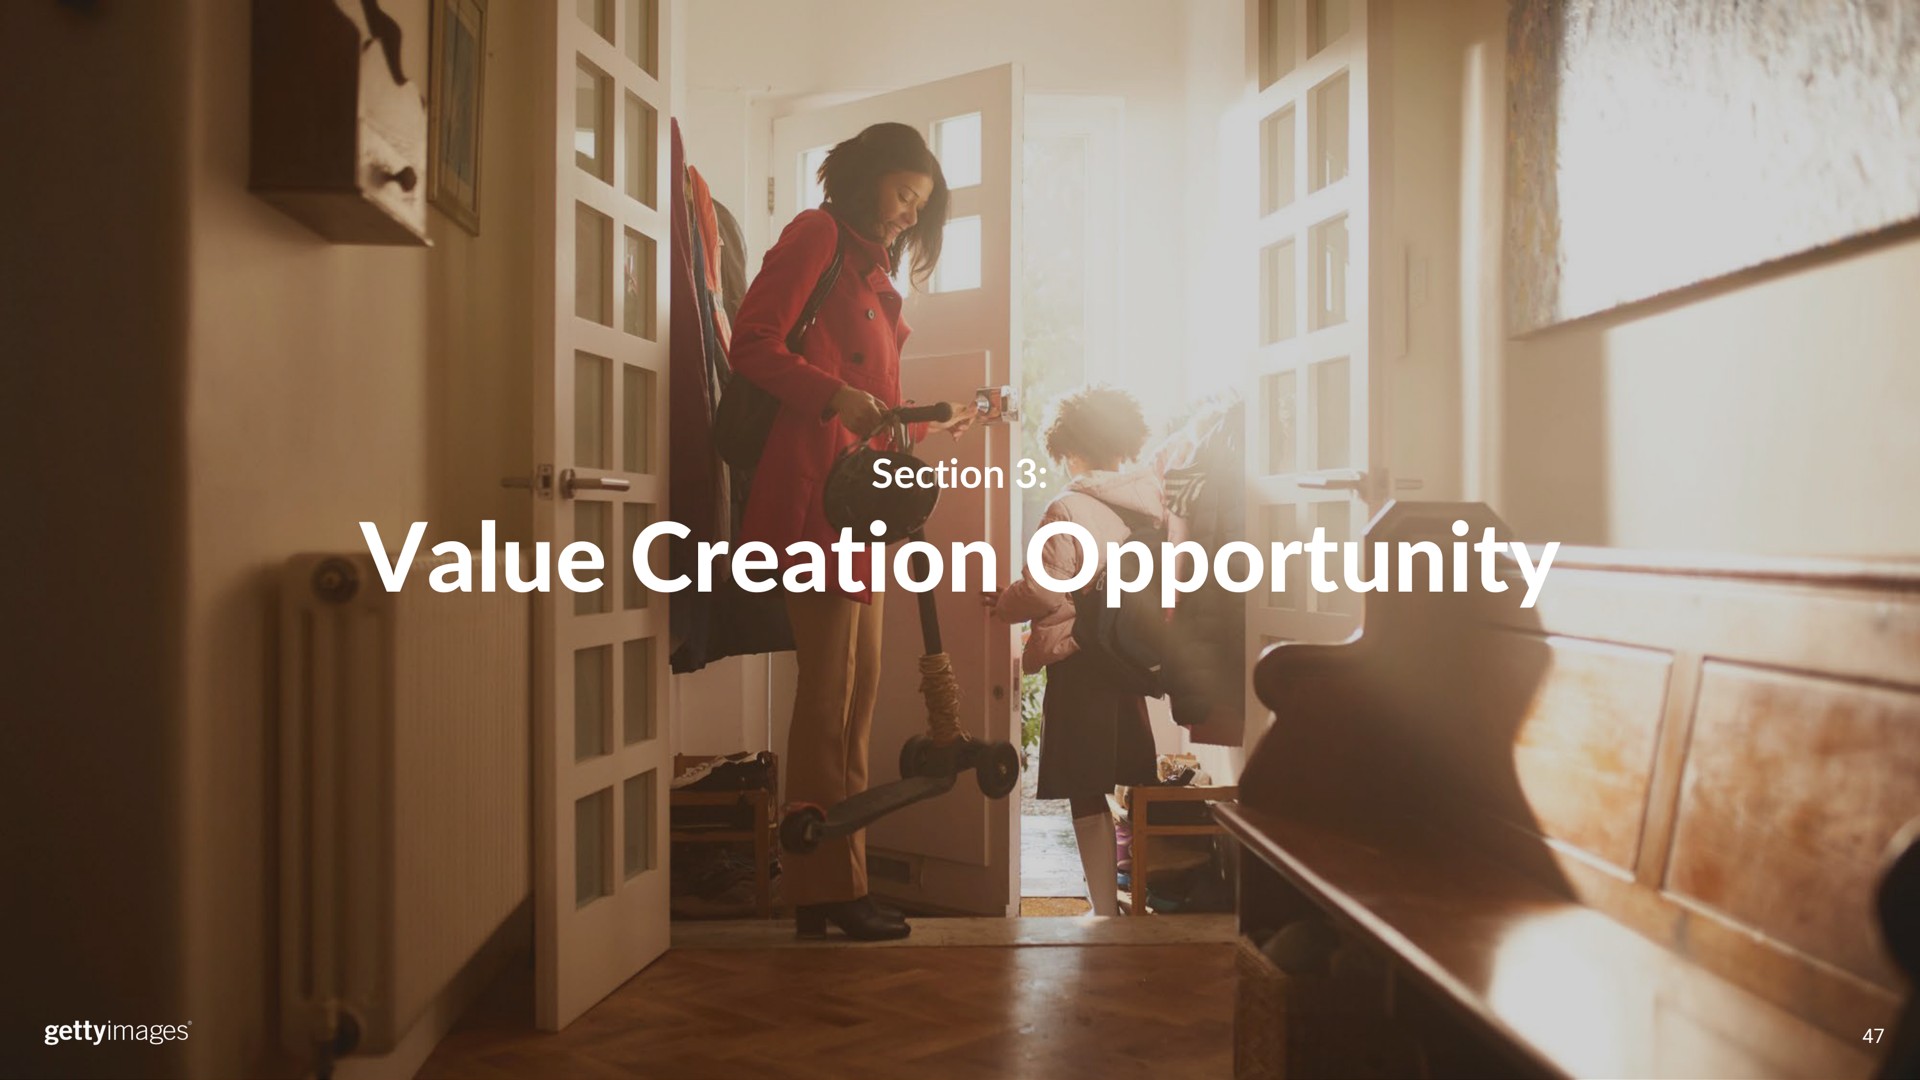 value creation opportunity | Getty